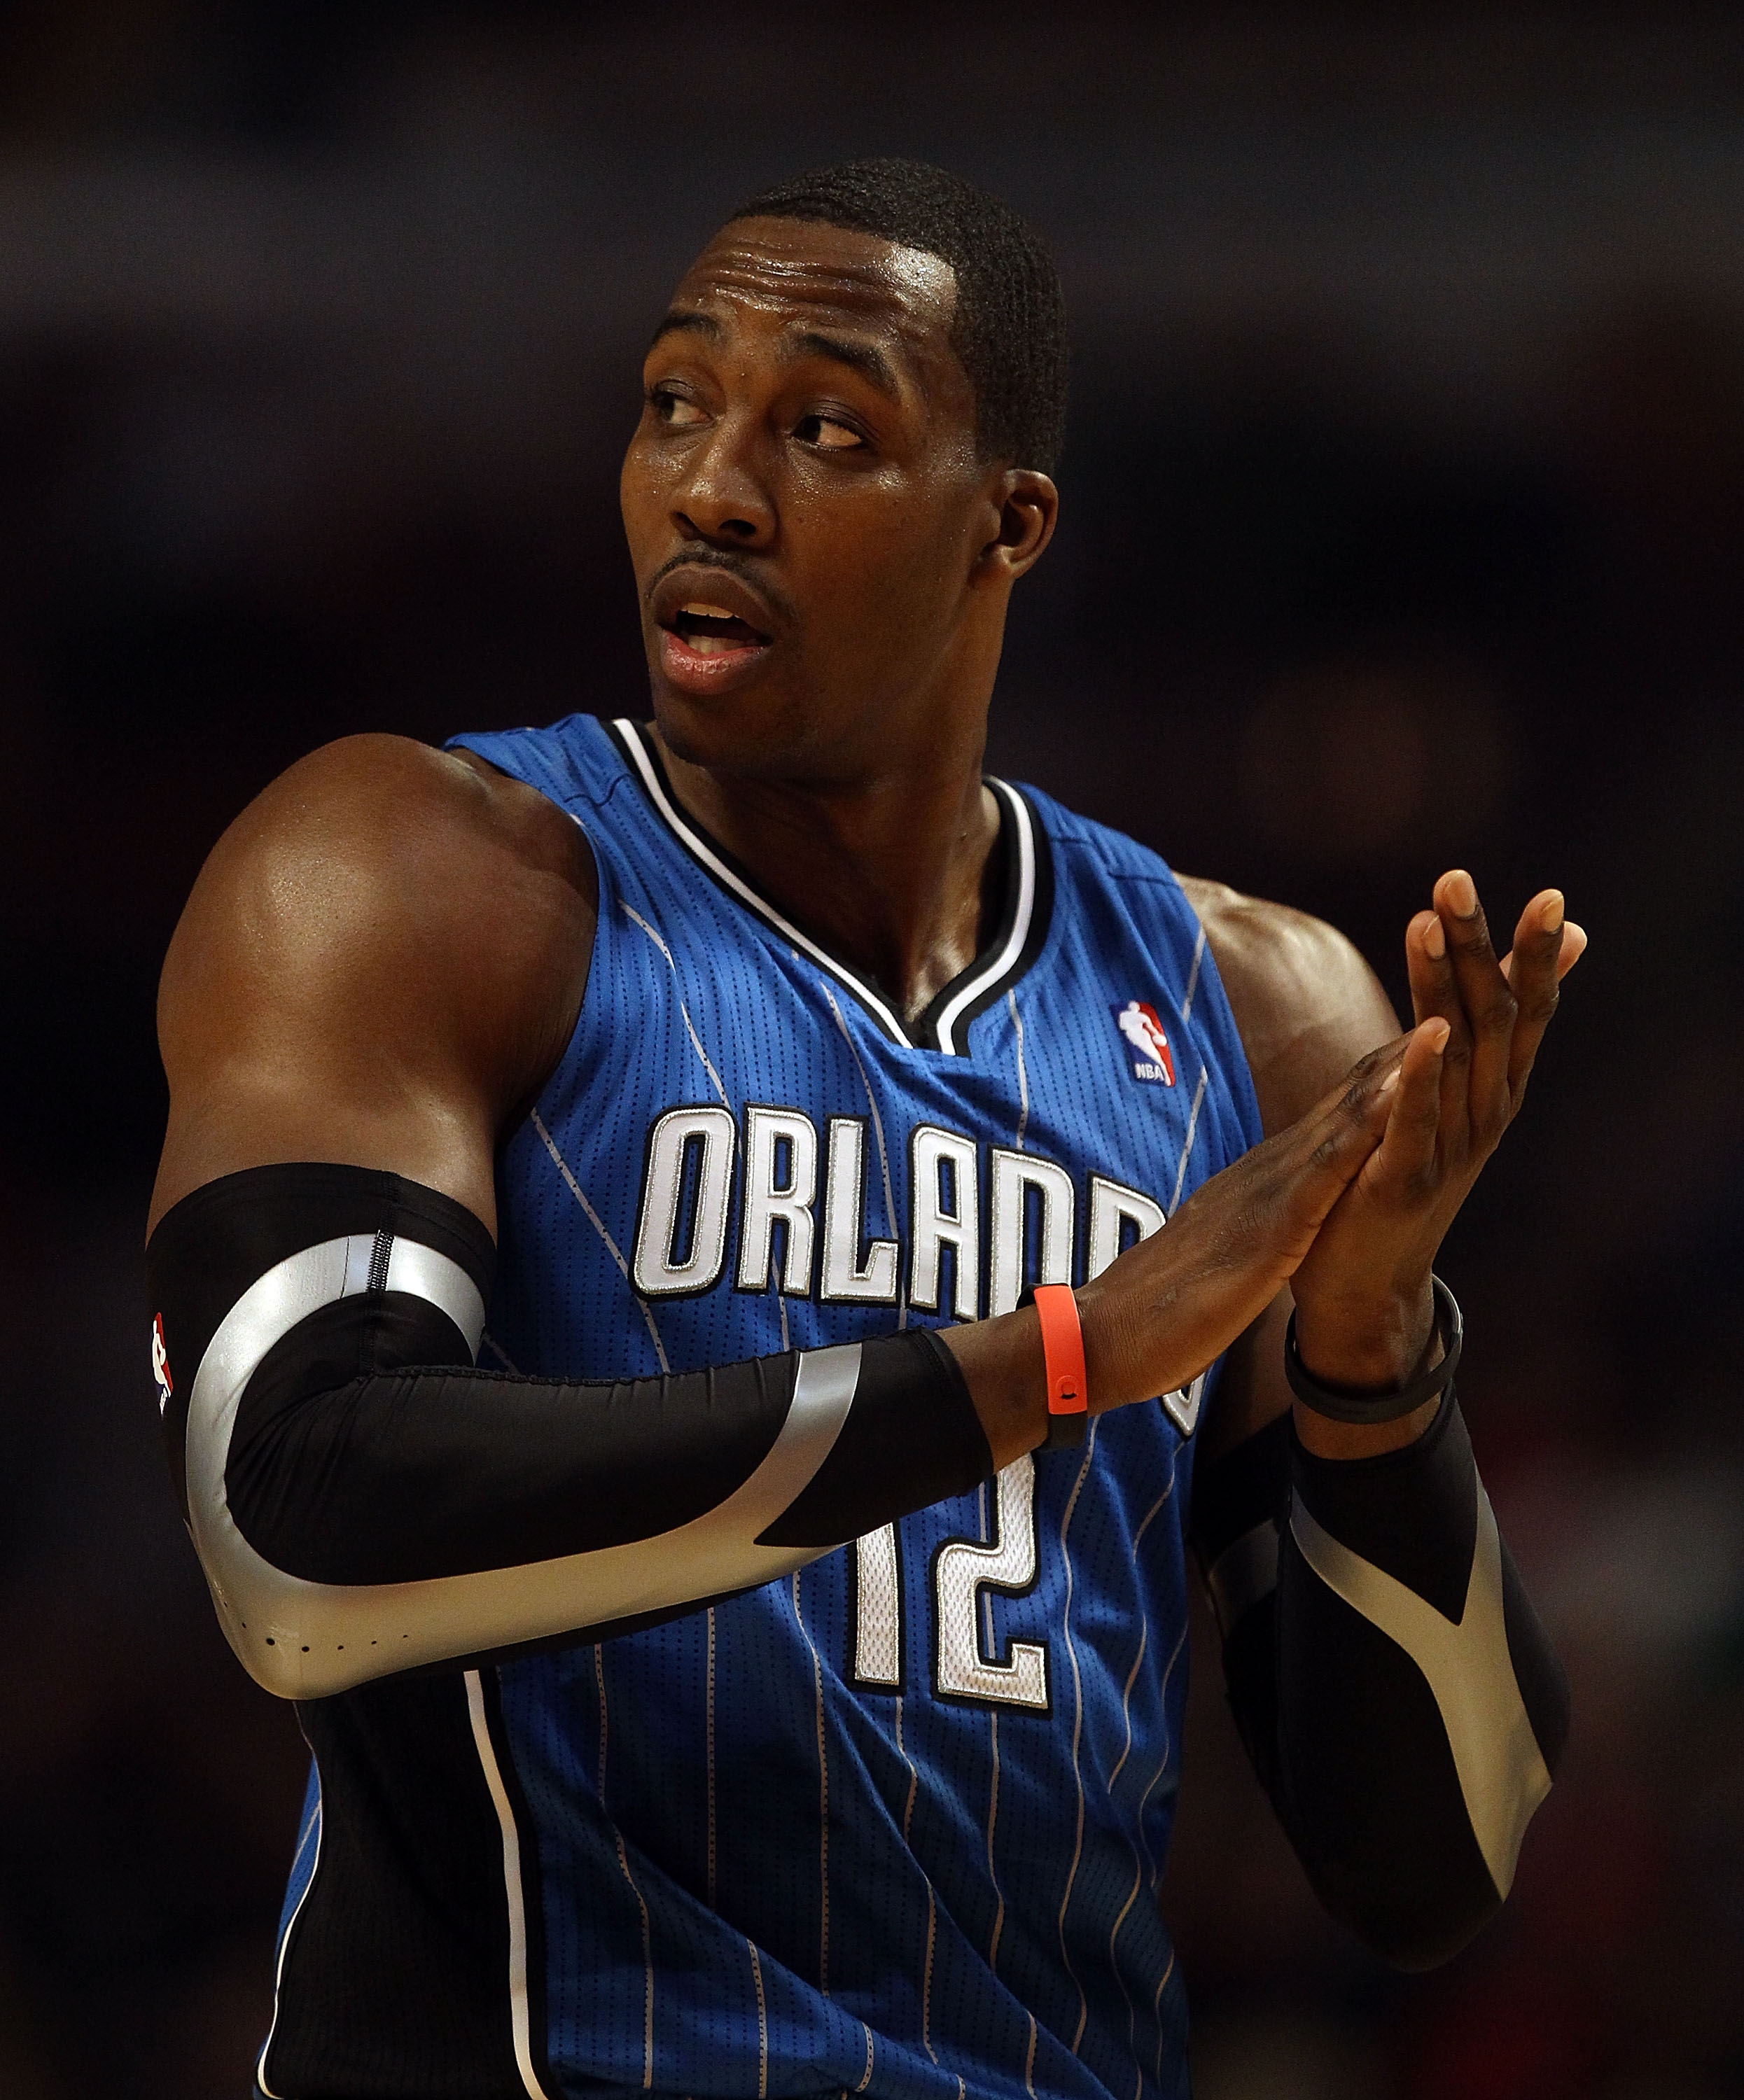 CHICAGO, IL - JANUARY 28: Dwight Howard #12 of the Orlando Magic prepares to shoot a free-throw on his way to a game-high 40 points against the Chicago Bulls at the United Center on January 28, 2011 in Chicago, Illinois. The Bulls defeated the Magic 99-90